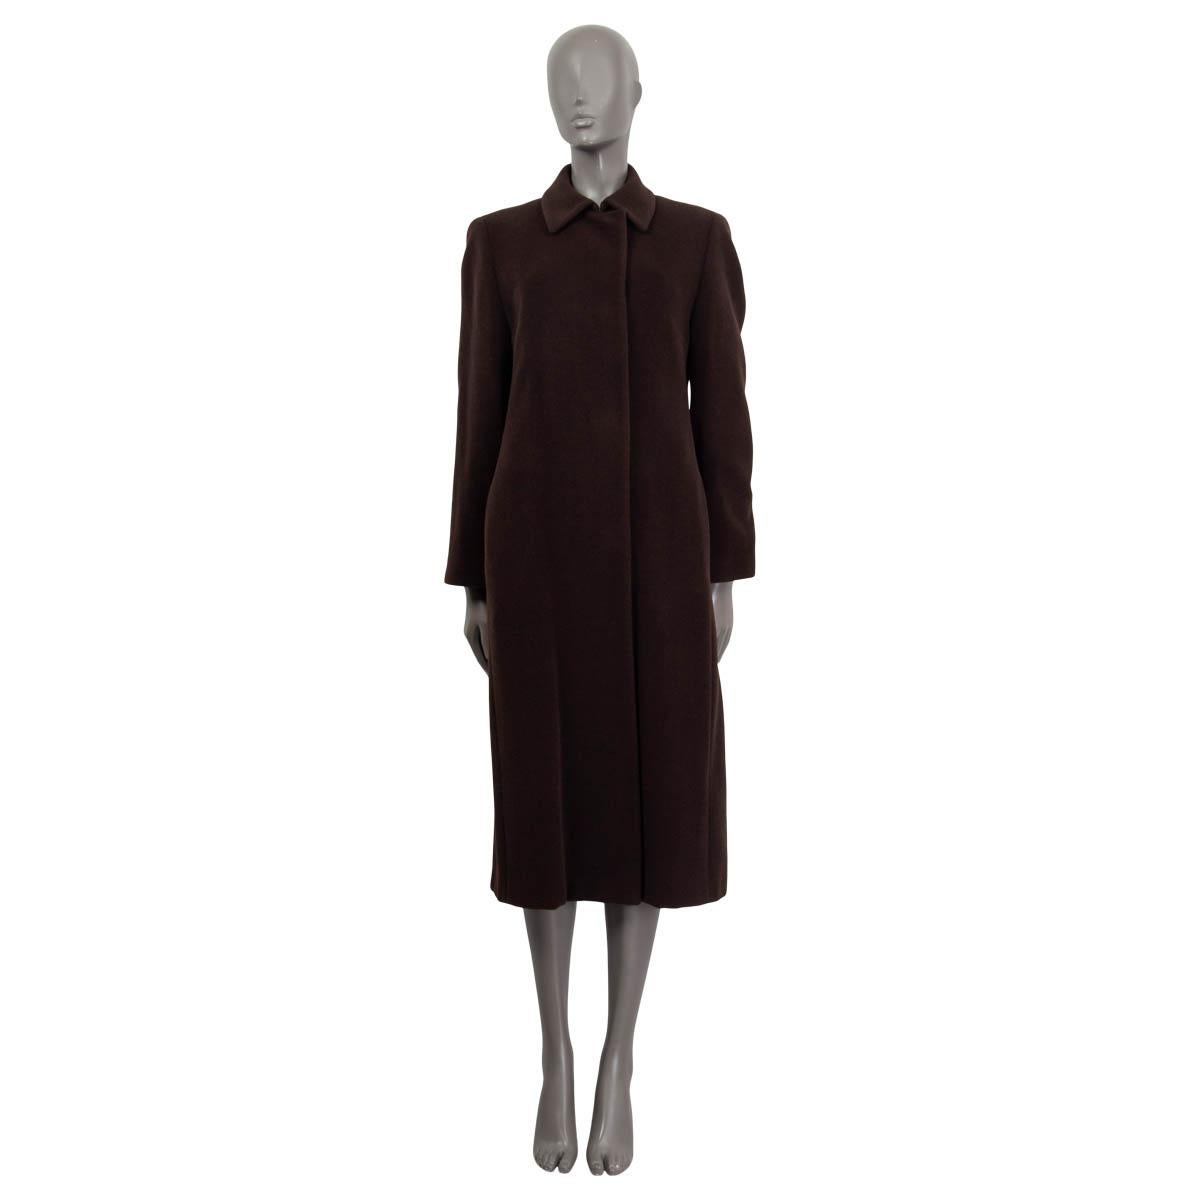 100% authentic Akris Punto long sleeve coat in dark brown wool (60%) and angora (40%). Features buttoned cuffs and a slit on the back. Opens with four concealed buttons and a hook on the front. Lined in brown viscose (100%). Has been worn and is in